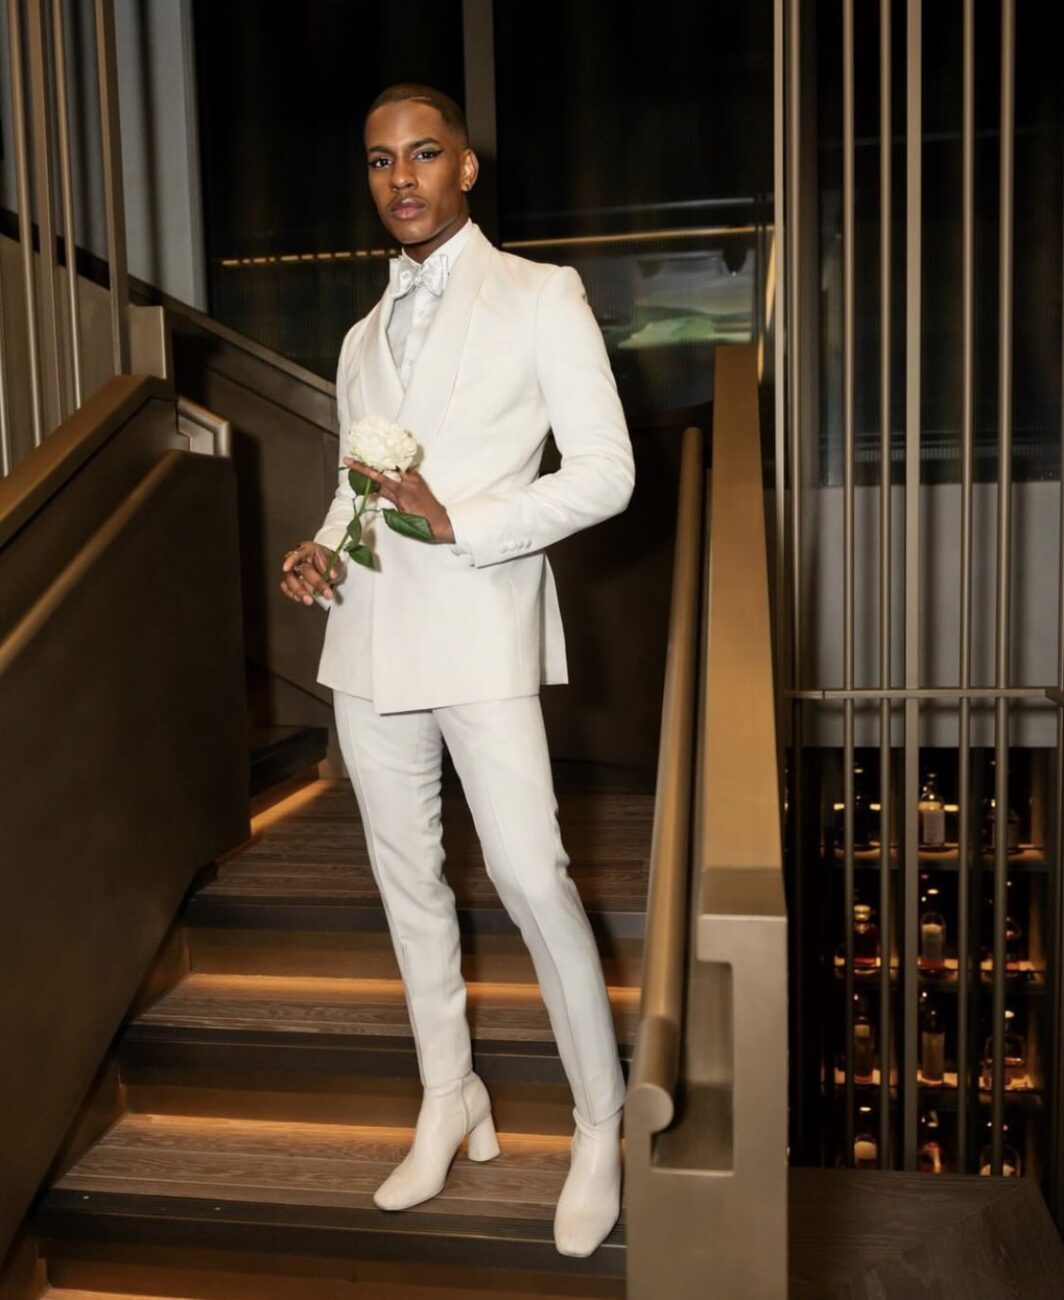 Denola Grey making a bold statement in a form-fitting white two-piece suit and heeled boots.